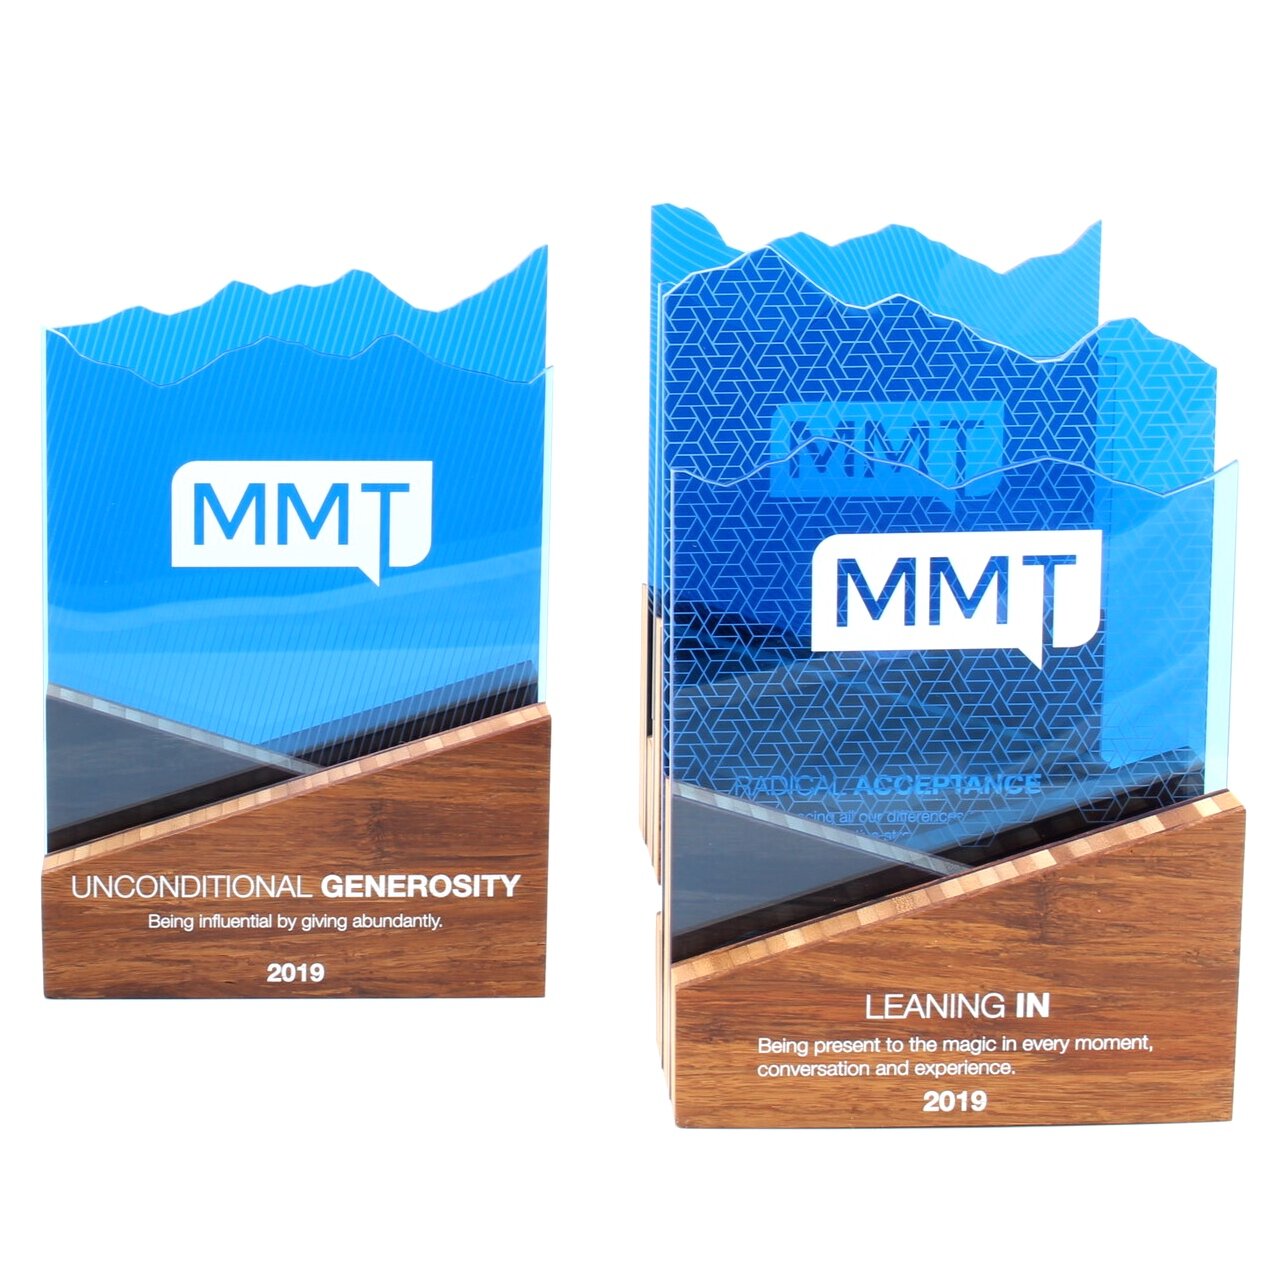 MMT+core+values+trophies+awards+yearly+staff+appreciation+6.jpg